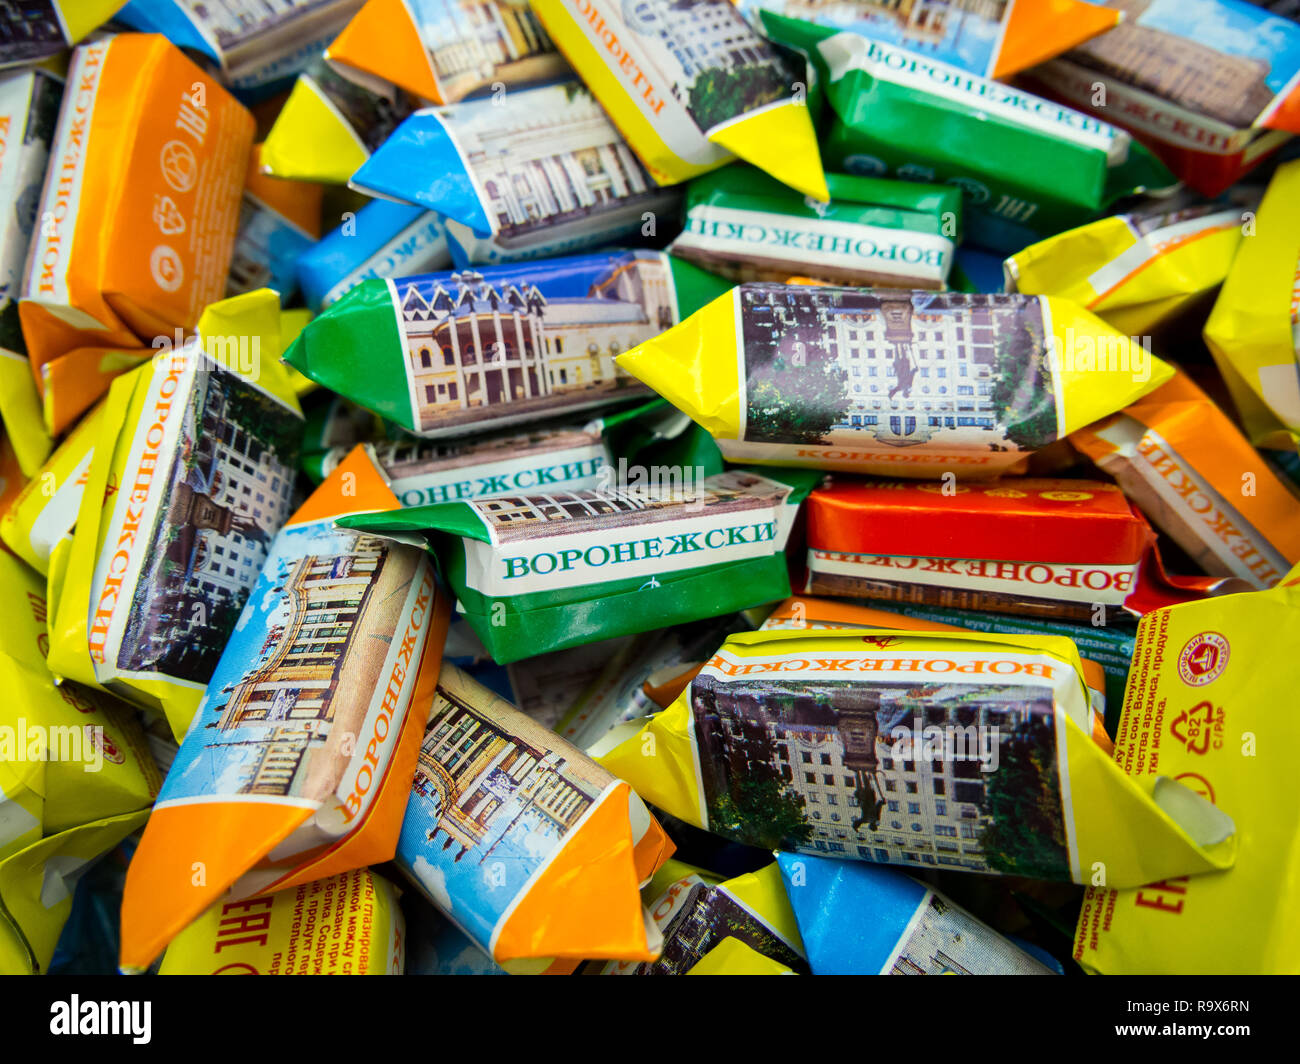 Voronezh, Russia - August 08, 2018: Chocolates 'Voronezh' - products of the Voronezh candy factory Stock Photo